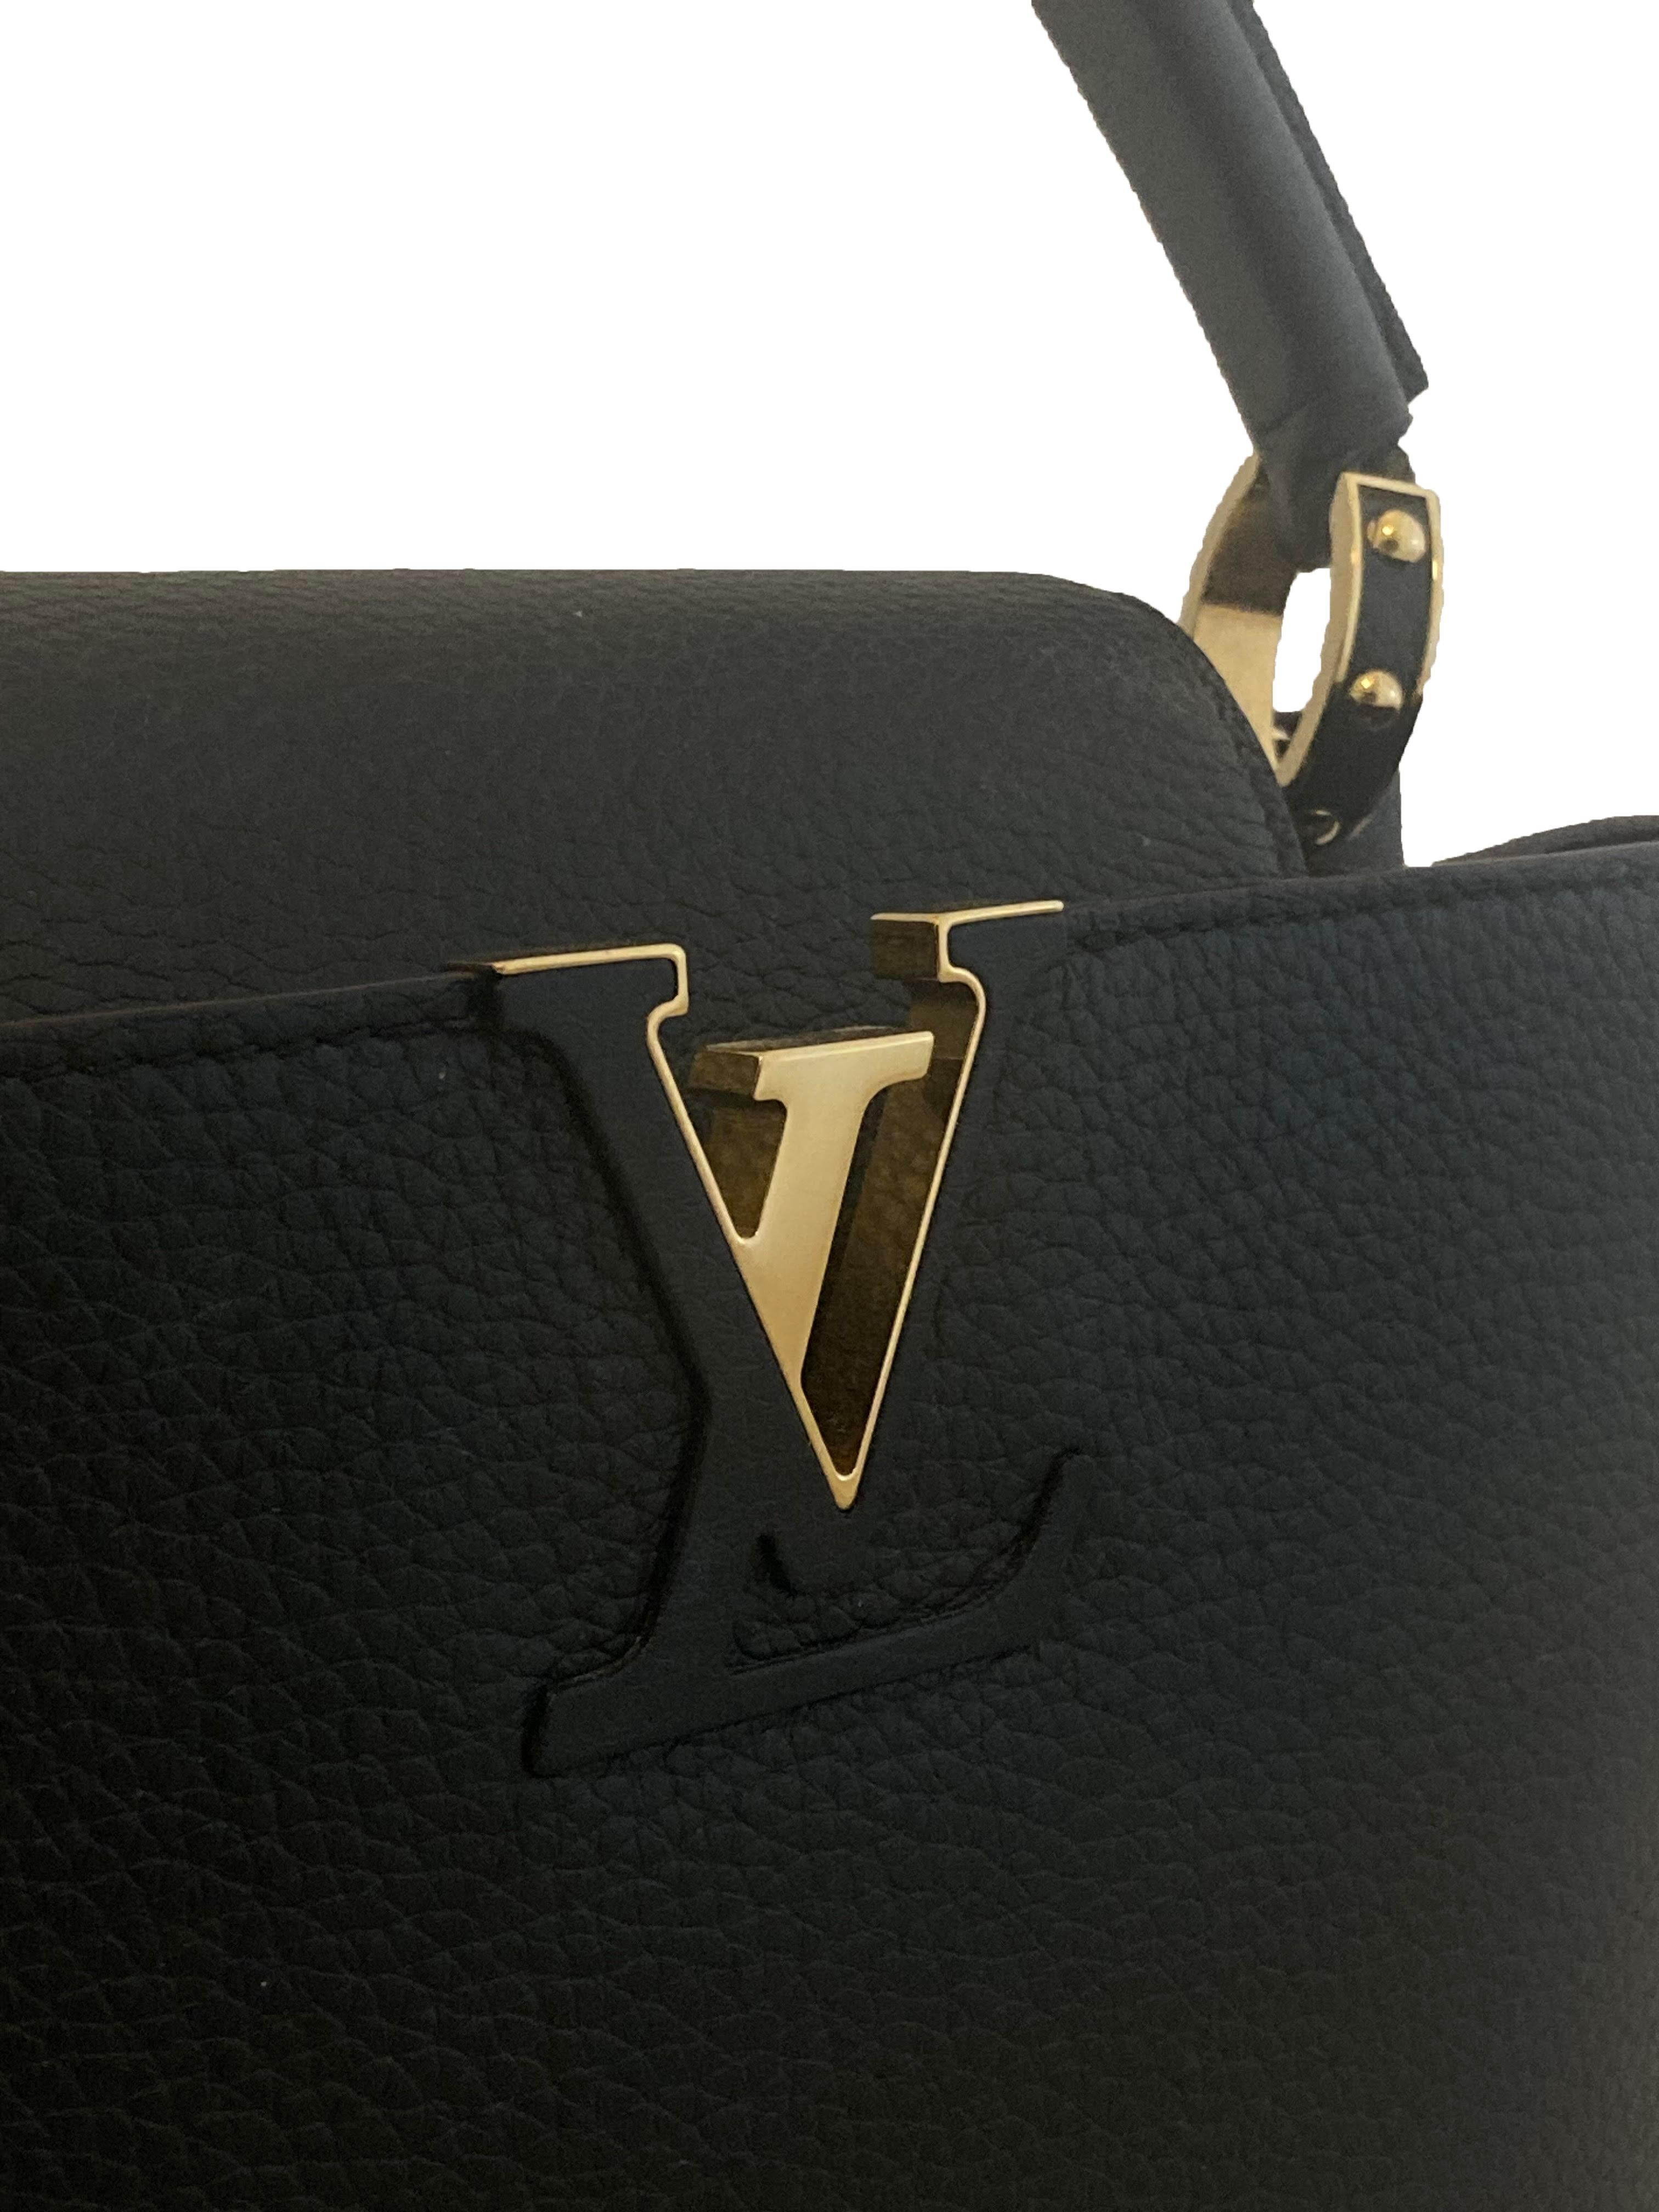 Black leather Capucine BB handbag from Louis Vuitton. Black textured Taurillon leather upper with shiny gold toned hardware. Branded with an interlocking 'LV' on the front in leather and gold. Single rolled leather top handle is fastened metal and